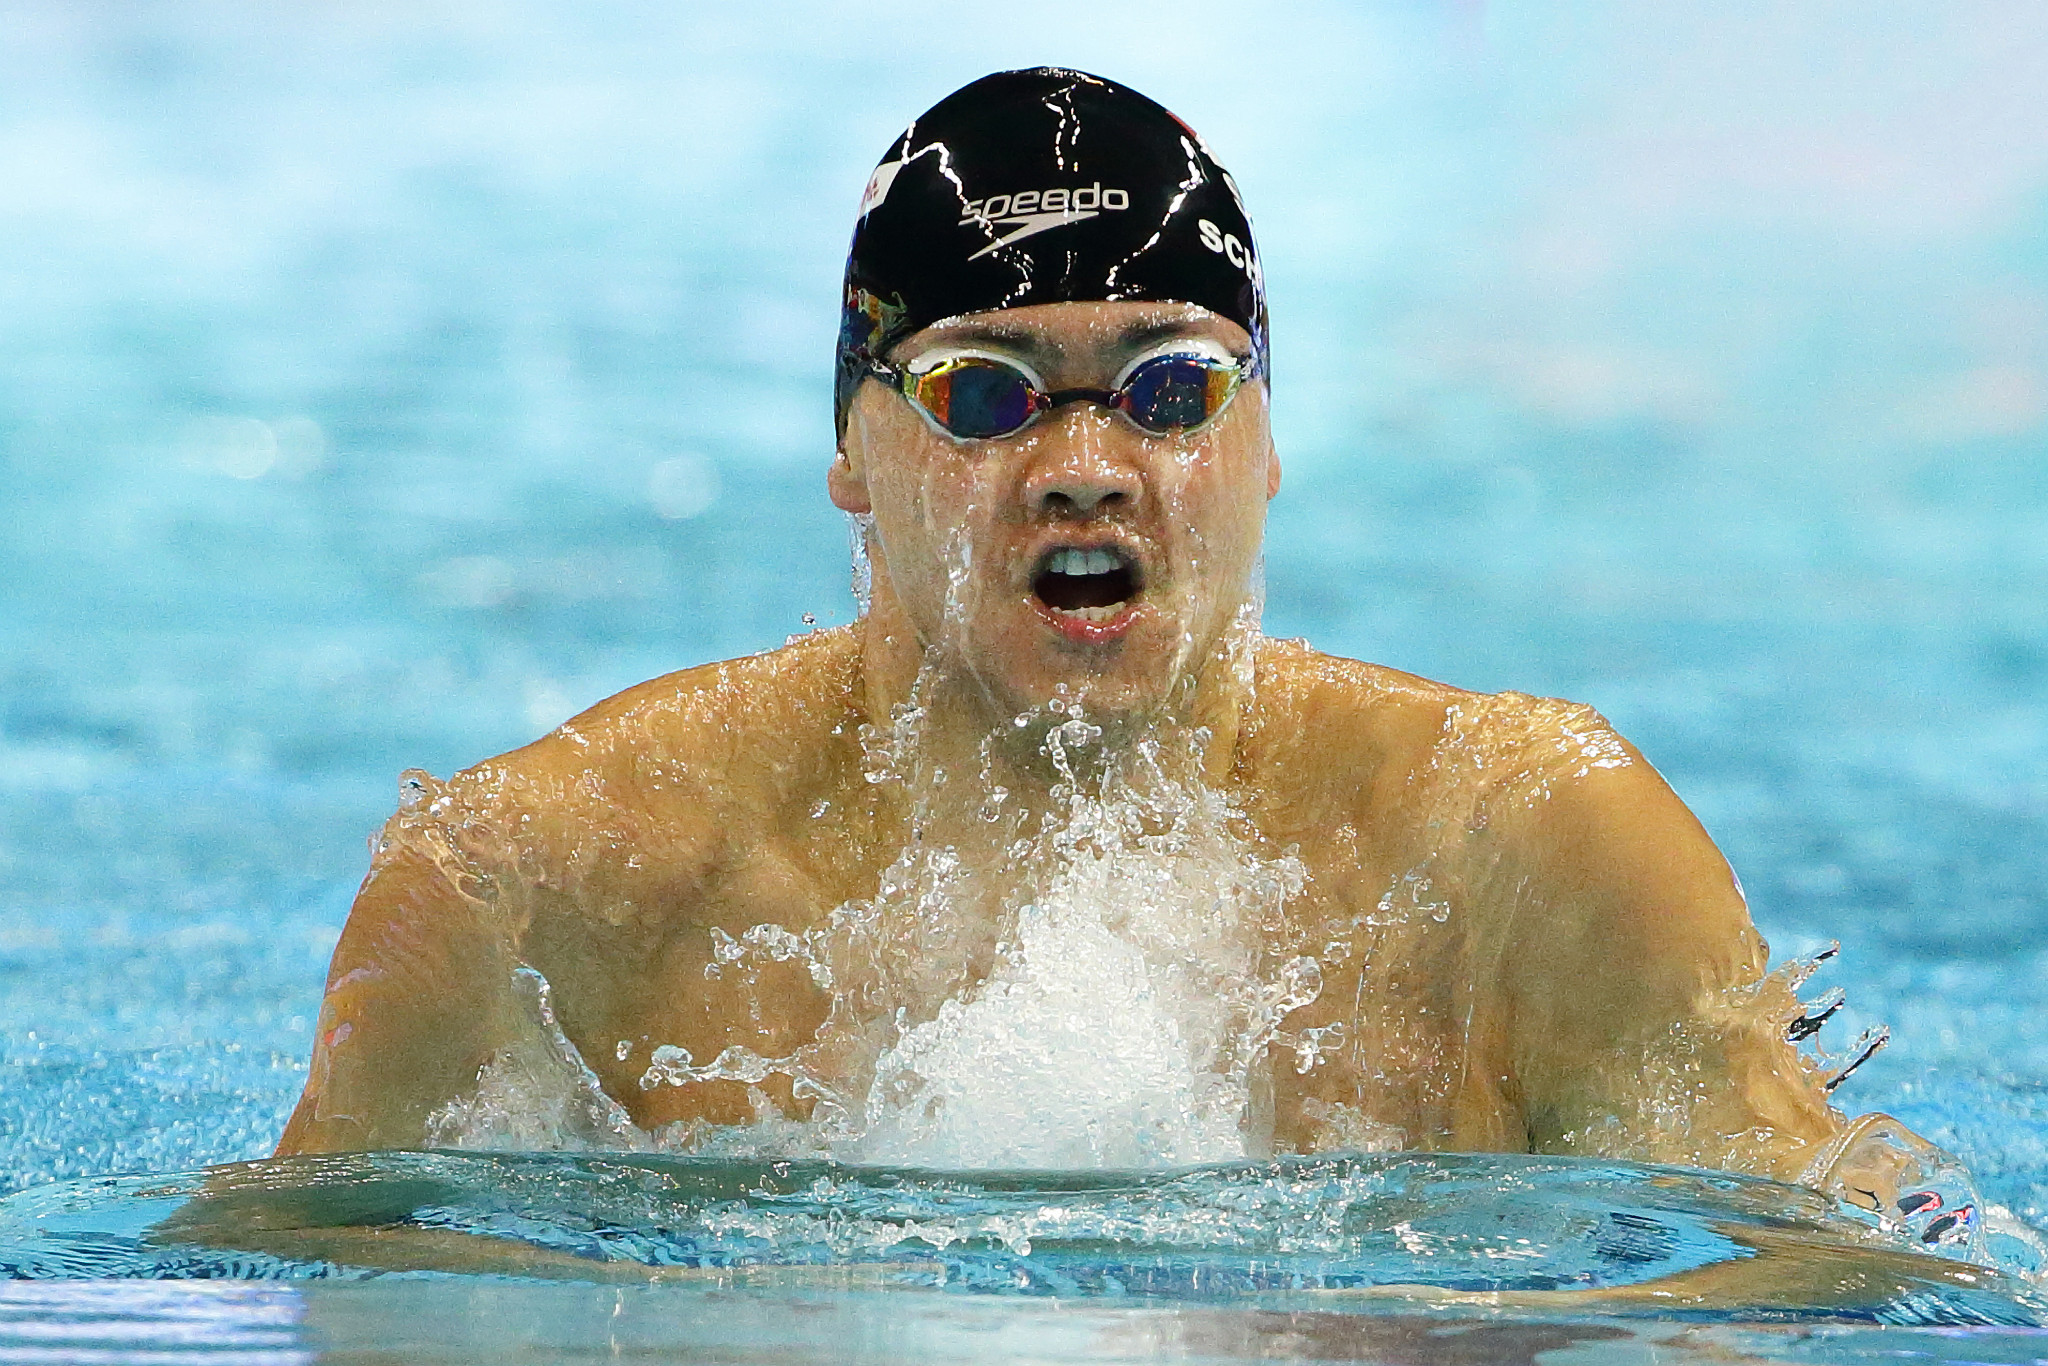 Schooling and Quah granted delays to national service to compete at Tokyo 2020